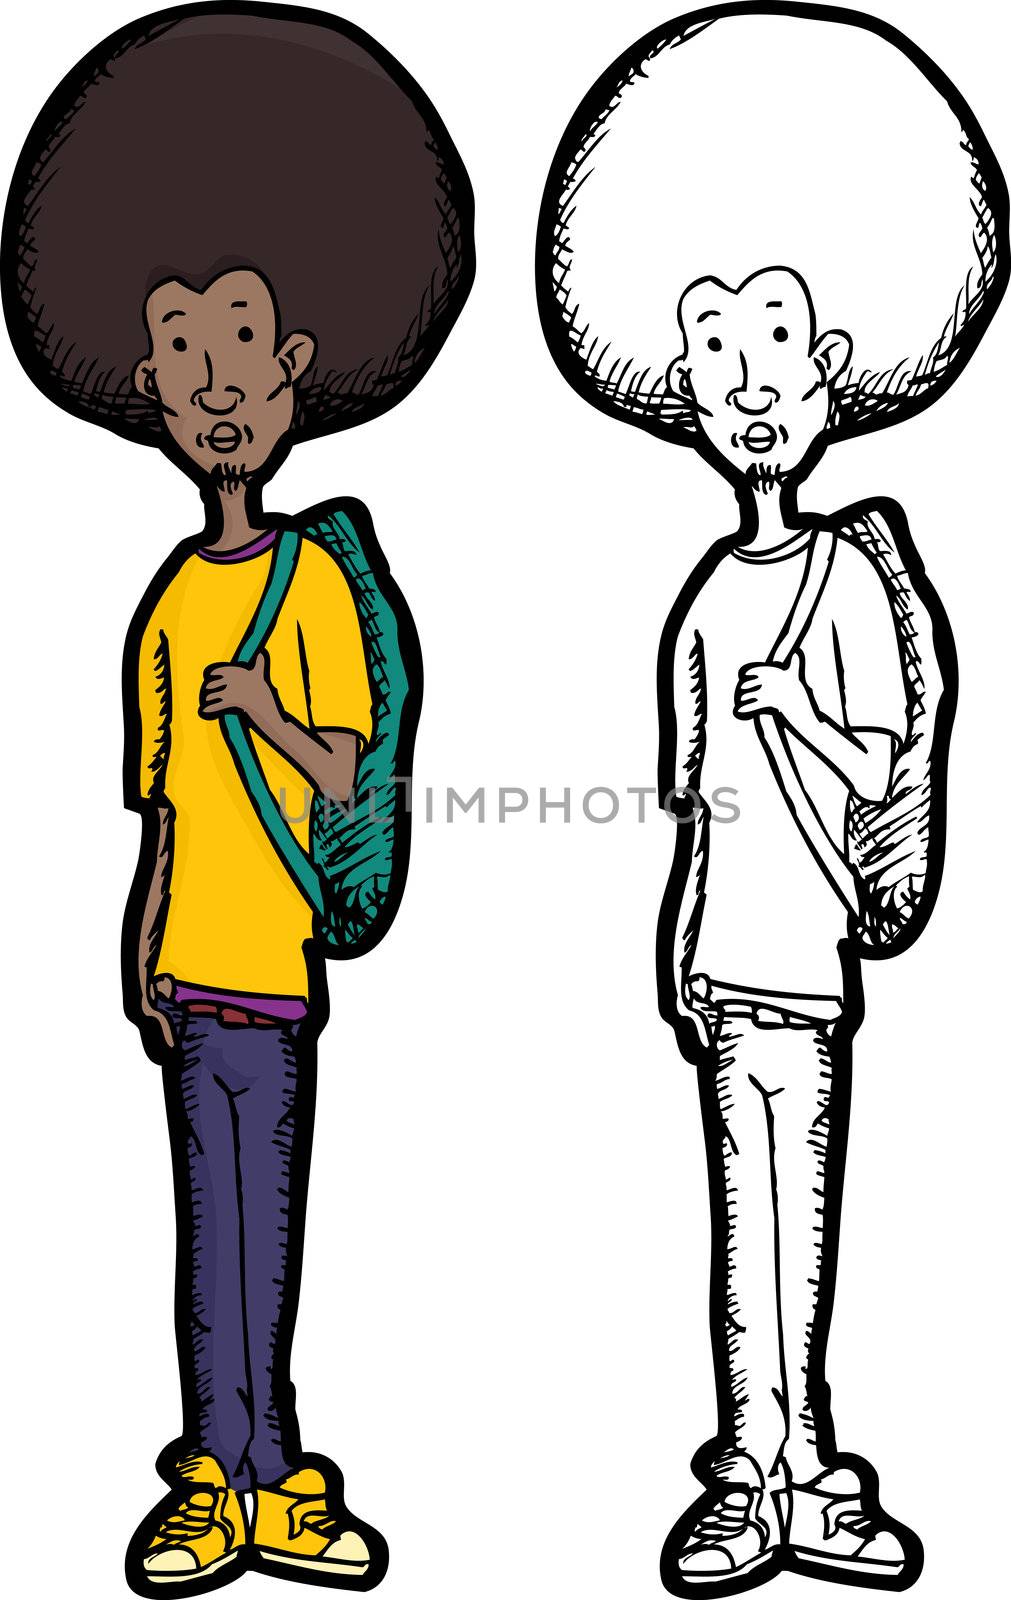 Skinny teenage Black man with afro hair style and backpack